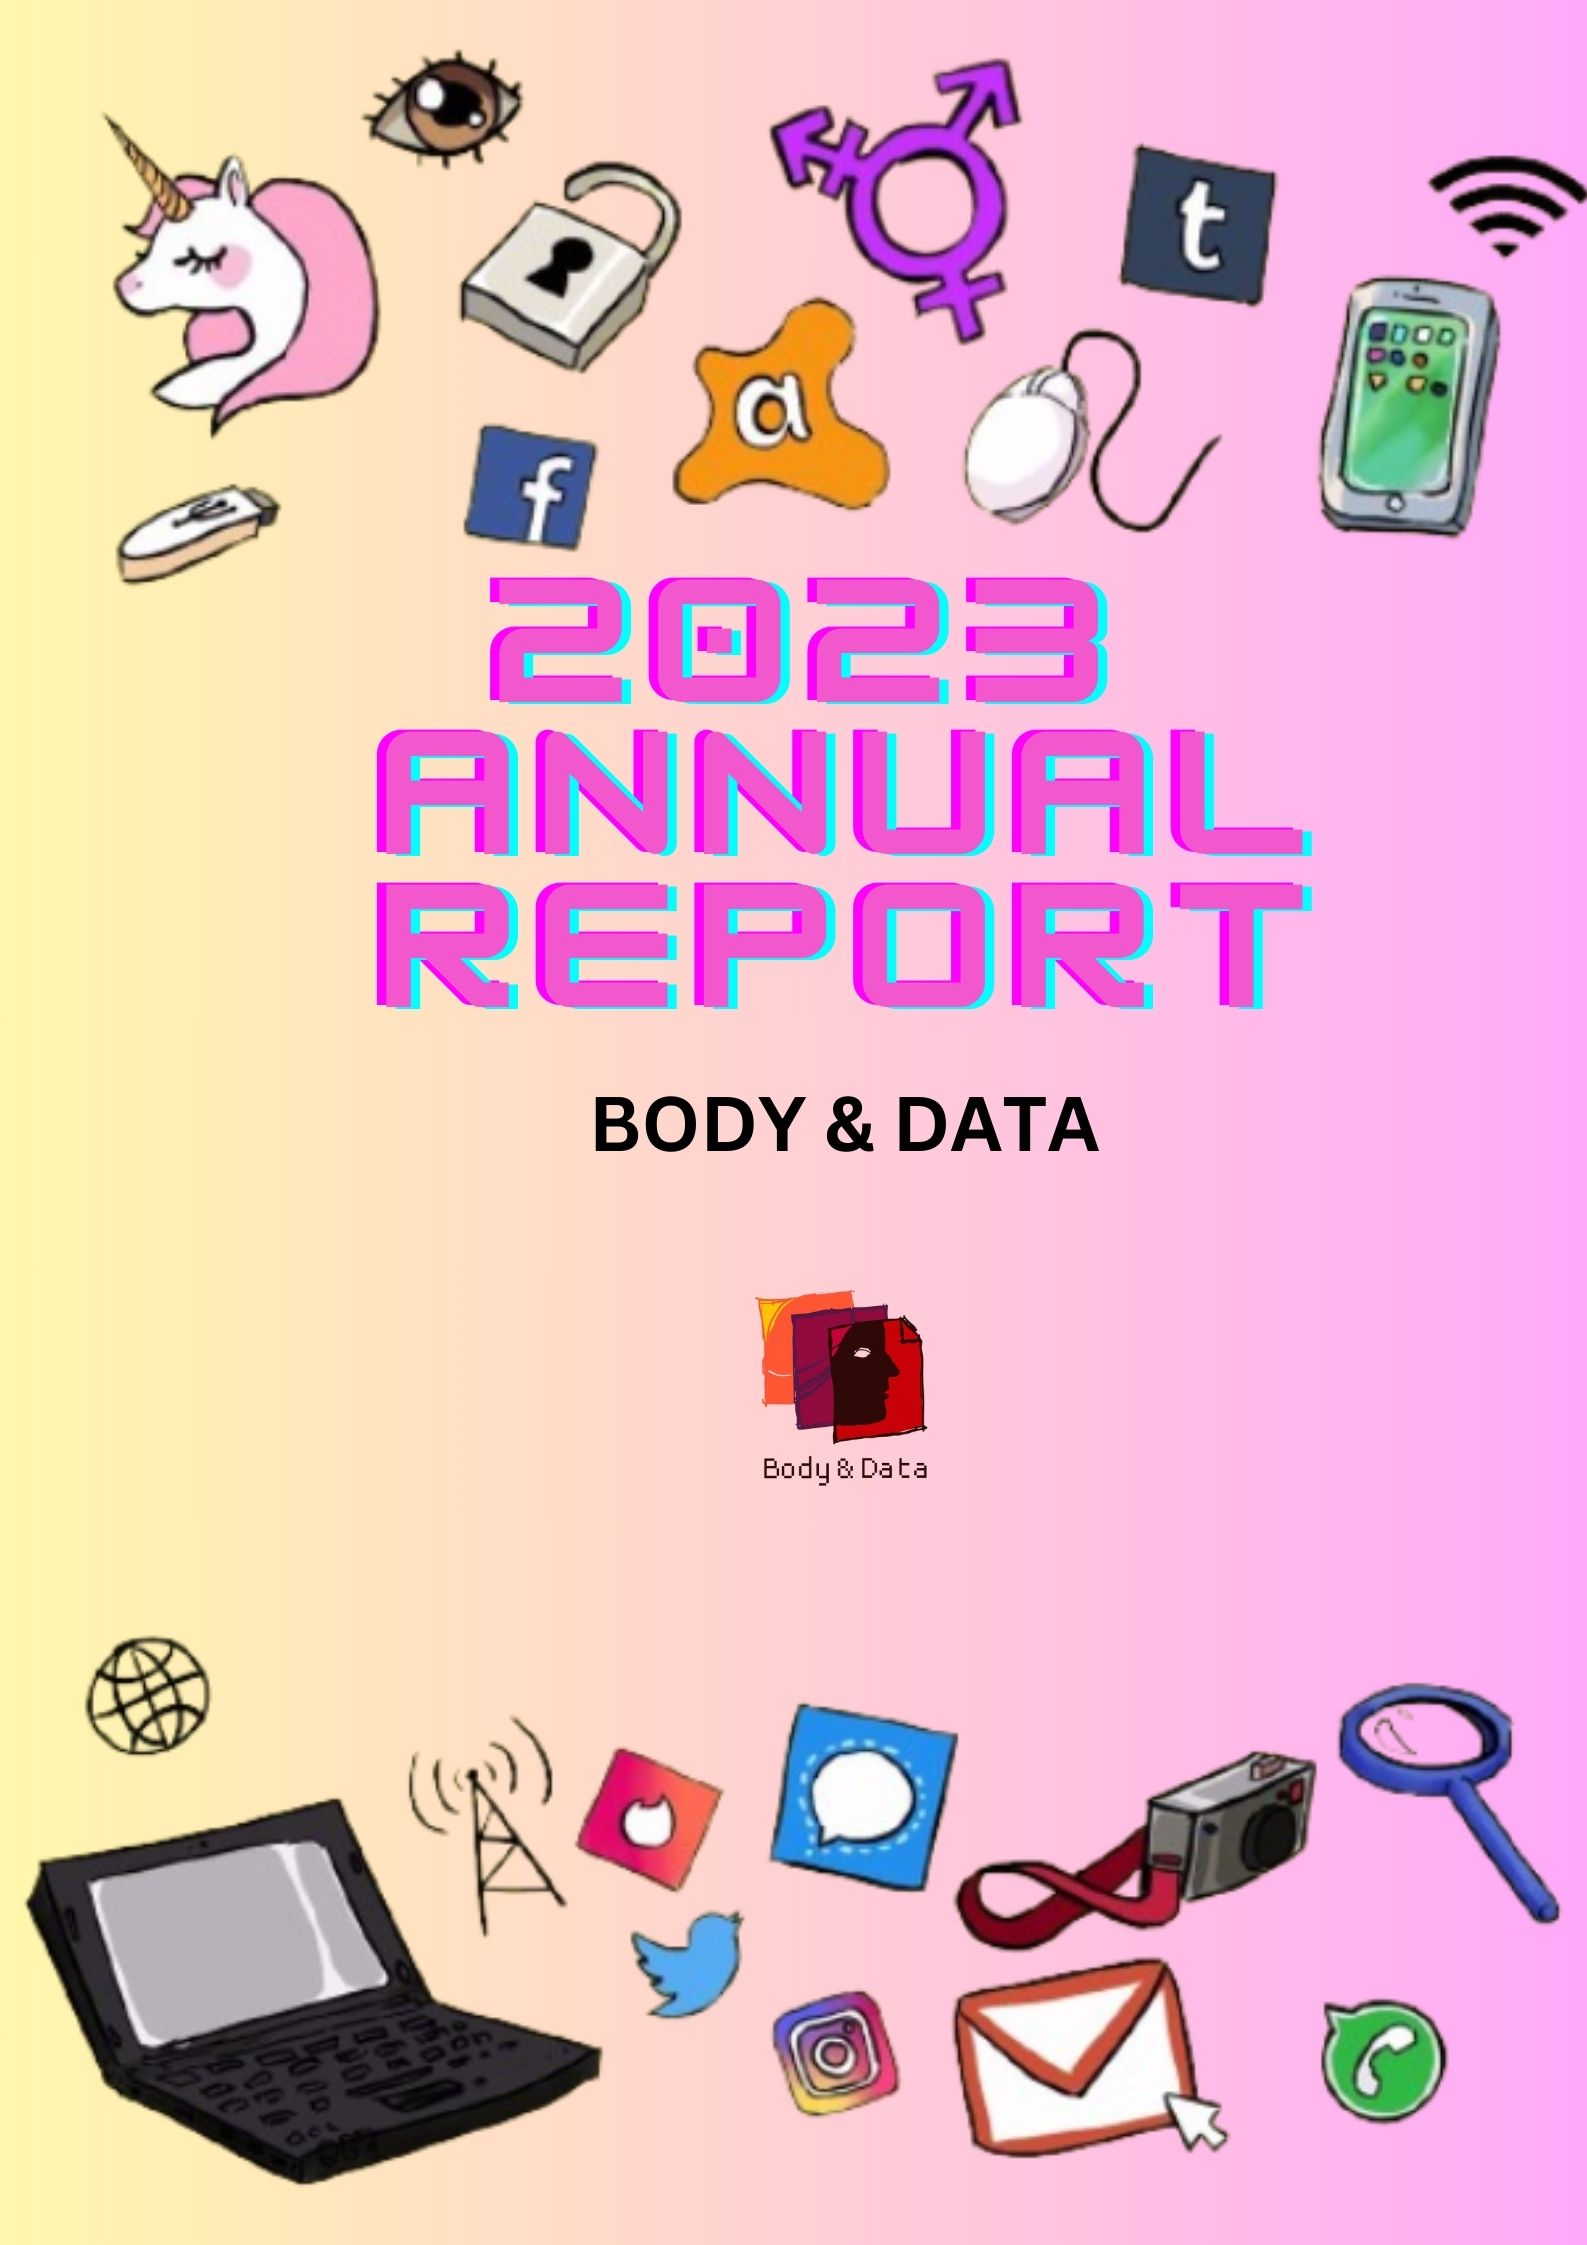 The front page of the Annual Report 2023. It is on a yellow to pink gradient. There are small icons of unicorn, mouse, wifi signal, mouse, mail, laptop. lock, eye and tower.